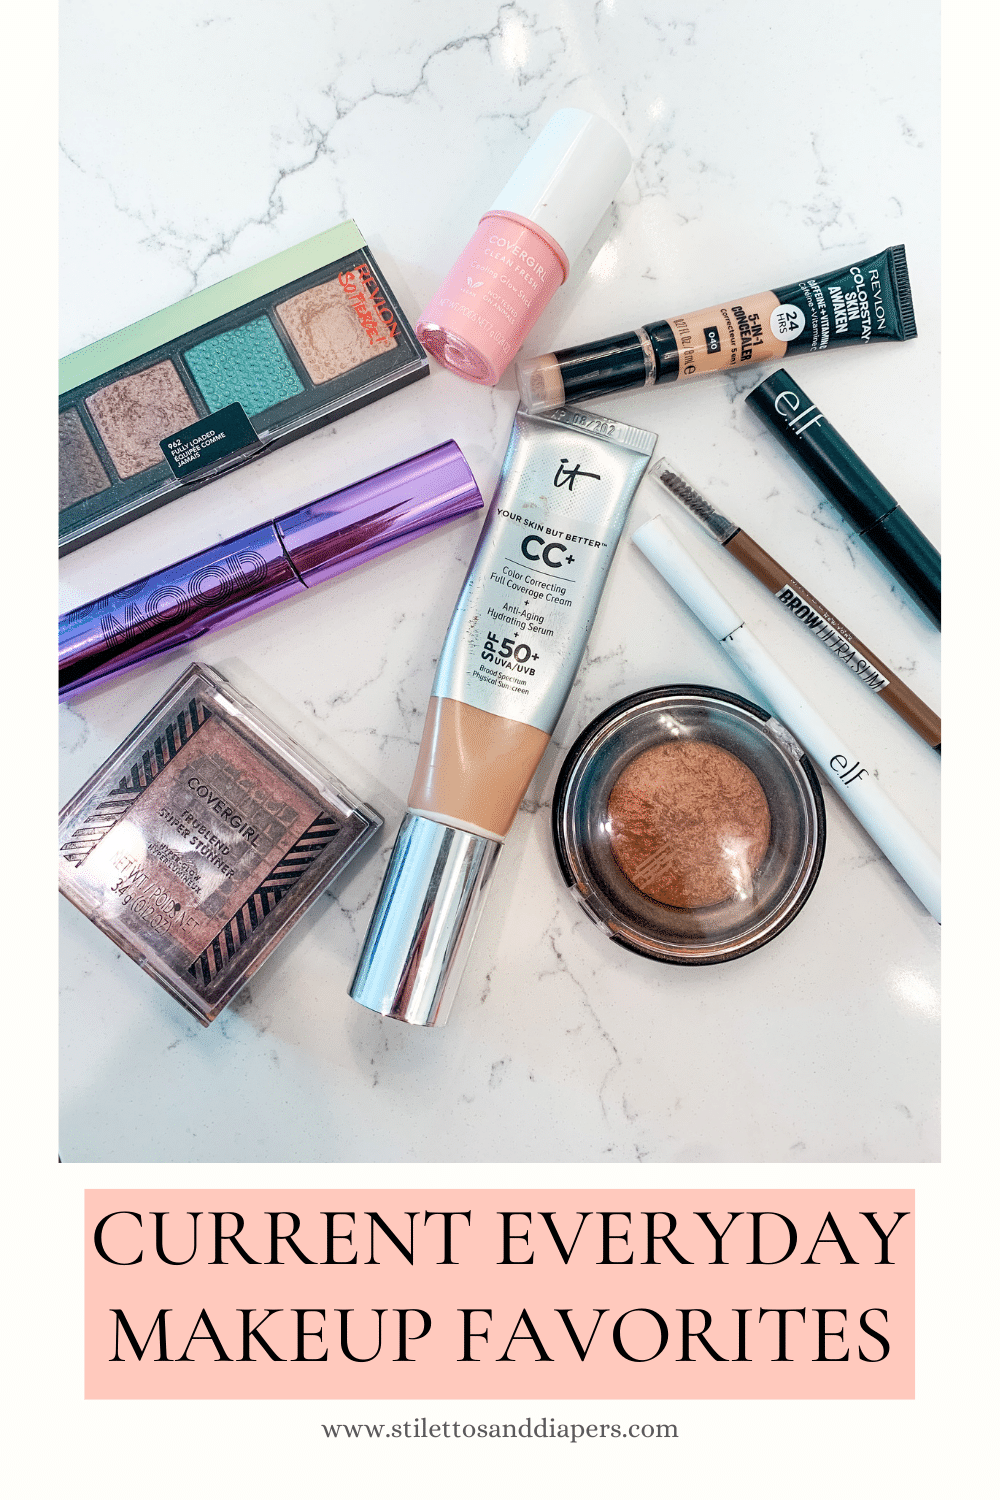 Current everyday makeup favorites, Stilettos and Diapers, affordable makeup, best drugstore makeup